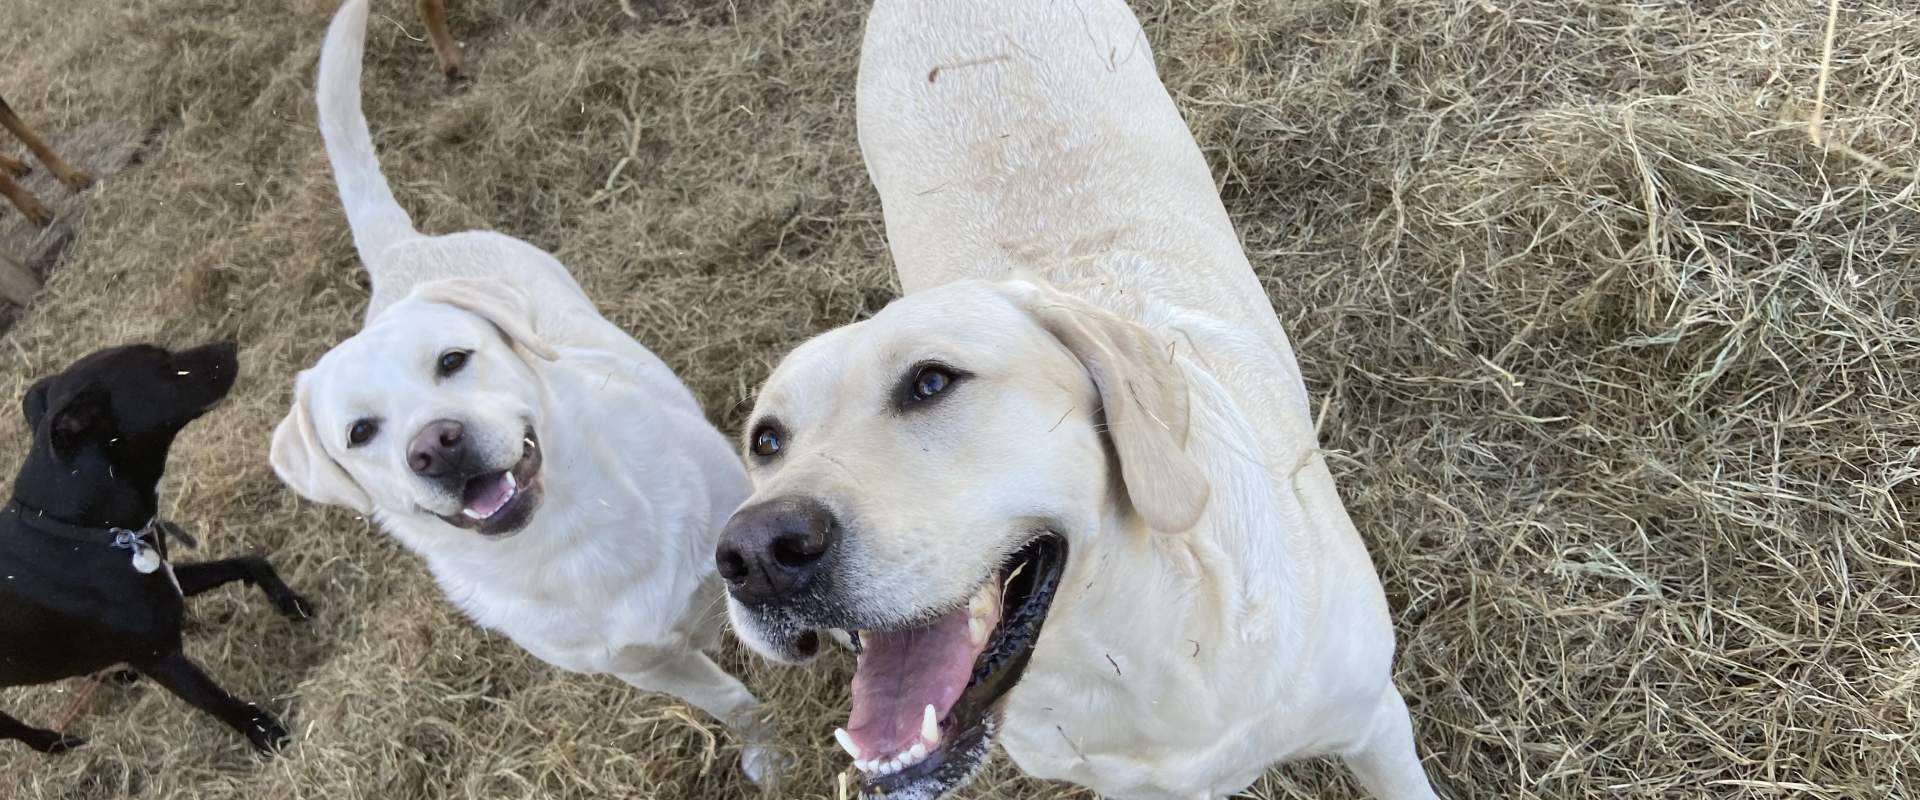 Two Labs smiling in the hay